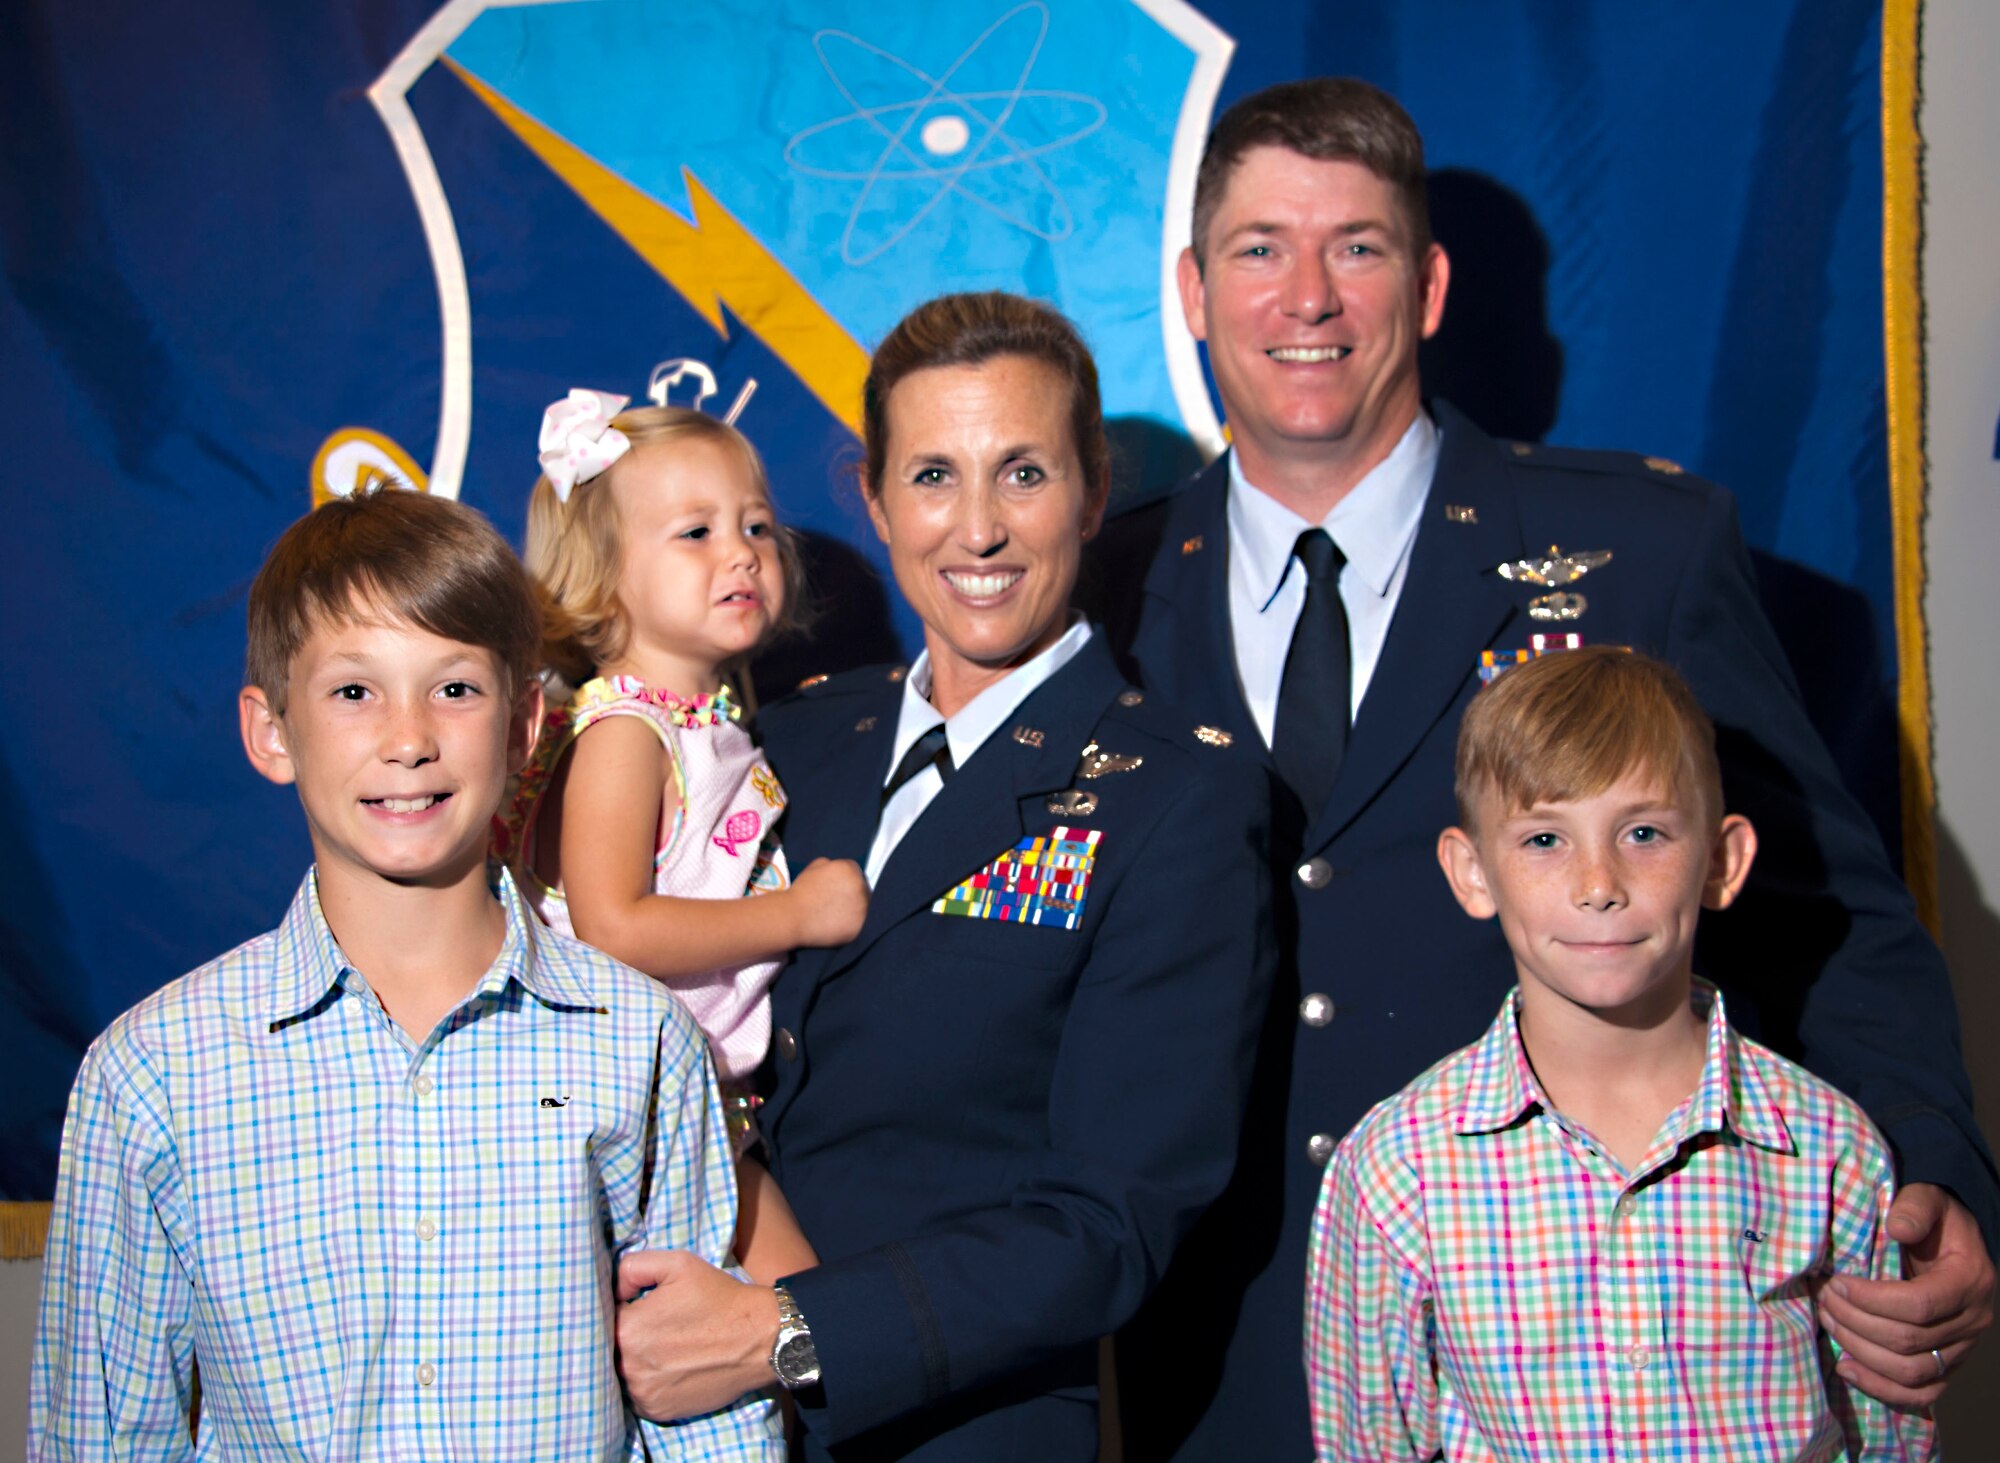 Lt. Col. Loralie Rasmussen, Officer Training School Detachment 12 commander, and her husband, Lt. Col. Reid Rasmussen, Air War College student, take a moment with their family after the change of command ceremony July 16, 2015, Maxwell Air Force Base, Alabama. The couple has three children, from left to right, Foster, Amelia Grace and Emmett. (U.S. Air Force photo by Airman 1st Class Alexa Culbert/Cleared)